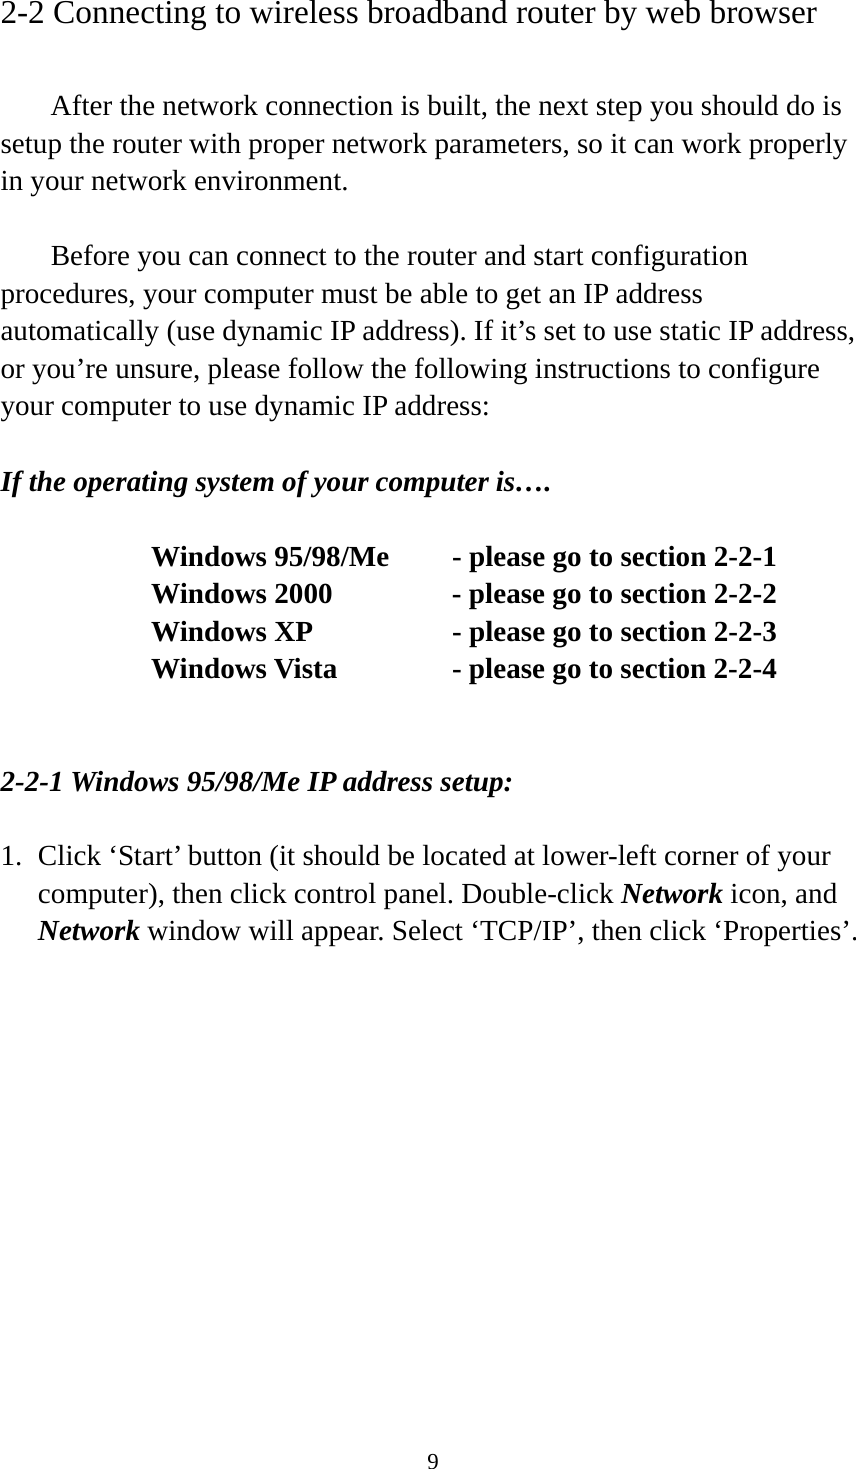 9 2-2 Connecting to wireless broadband router by web browser    After the network connection is built, the next step you should do is setup the router with proper network parameters, so it can work properly in your network environment.    Before you can connect to the router and start configuration procedures, your computer must be able to get an IP address automatically (use dynamic IP address). If it’s set to use static IP address, or you’re unsure, please follow the following instructions to configure your computer to use dynamic IP address:  If the operating system of your computer is….     Windows 95/98/Me    - please go to section 2-2-1       Windows 2000           - please go to section 2-2-2         Windows XP      - please go to section 2-2-3       Windows Vista      - please go to section 2-2-4   2-2-1 Windows 95/98/Me IP address setup:  1. Click ‘Start’ button (it should be located at lower-left corner of your computer), then click control panel. Double-click Network icon, and Network window will appear. Select ‘TCP/IP’, then click ‘Properties’.  